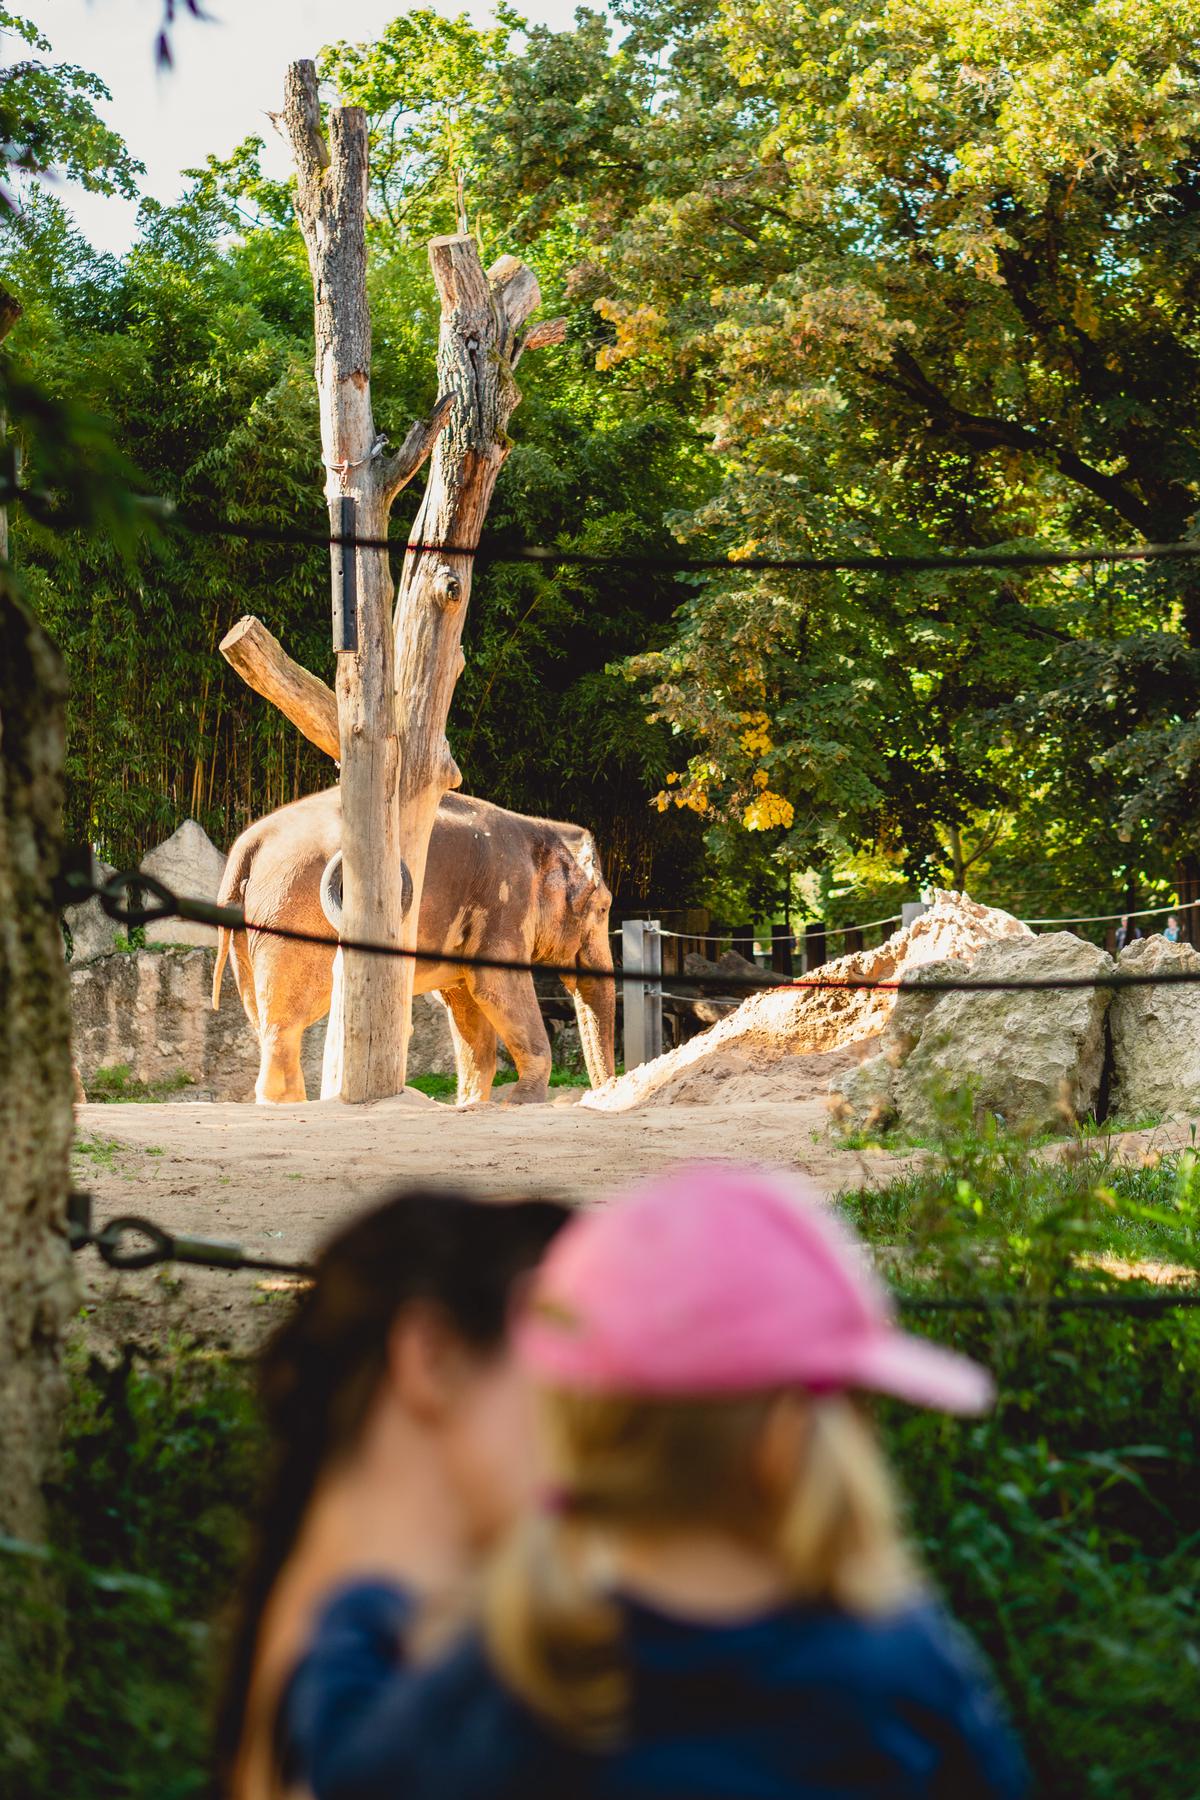 A picture of a family happily walking through the San Diego Zoo, with a monkey in a nearby tree and a giraffe in the distance.